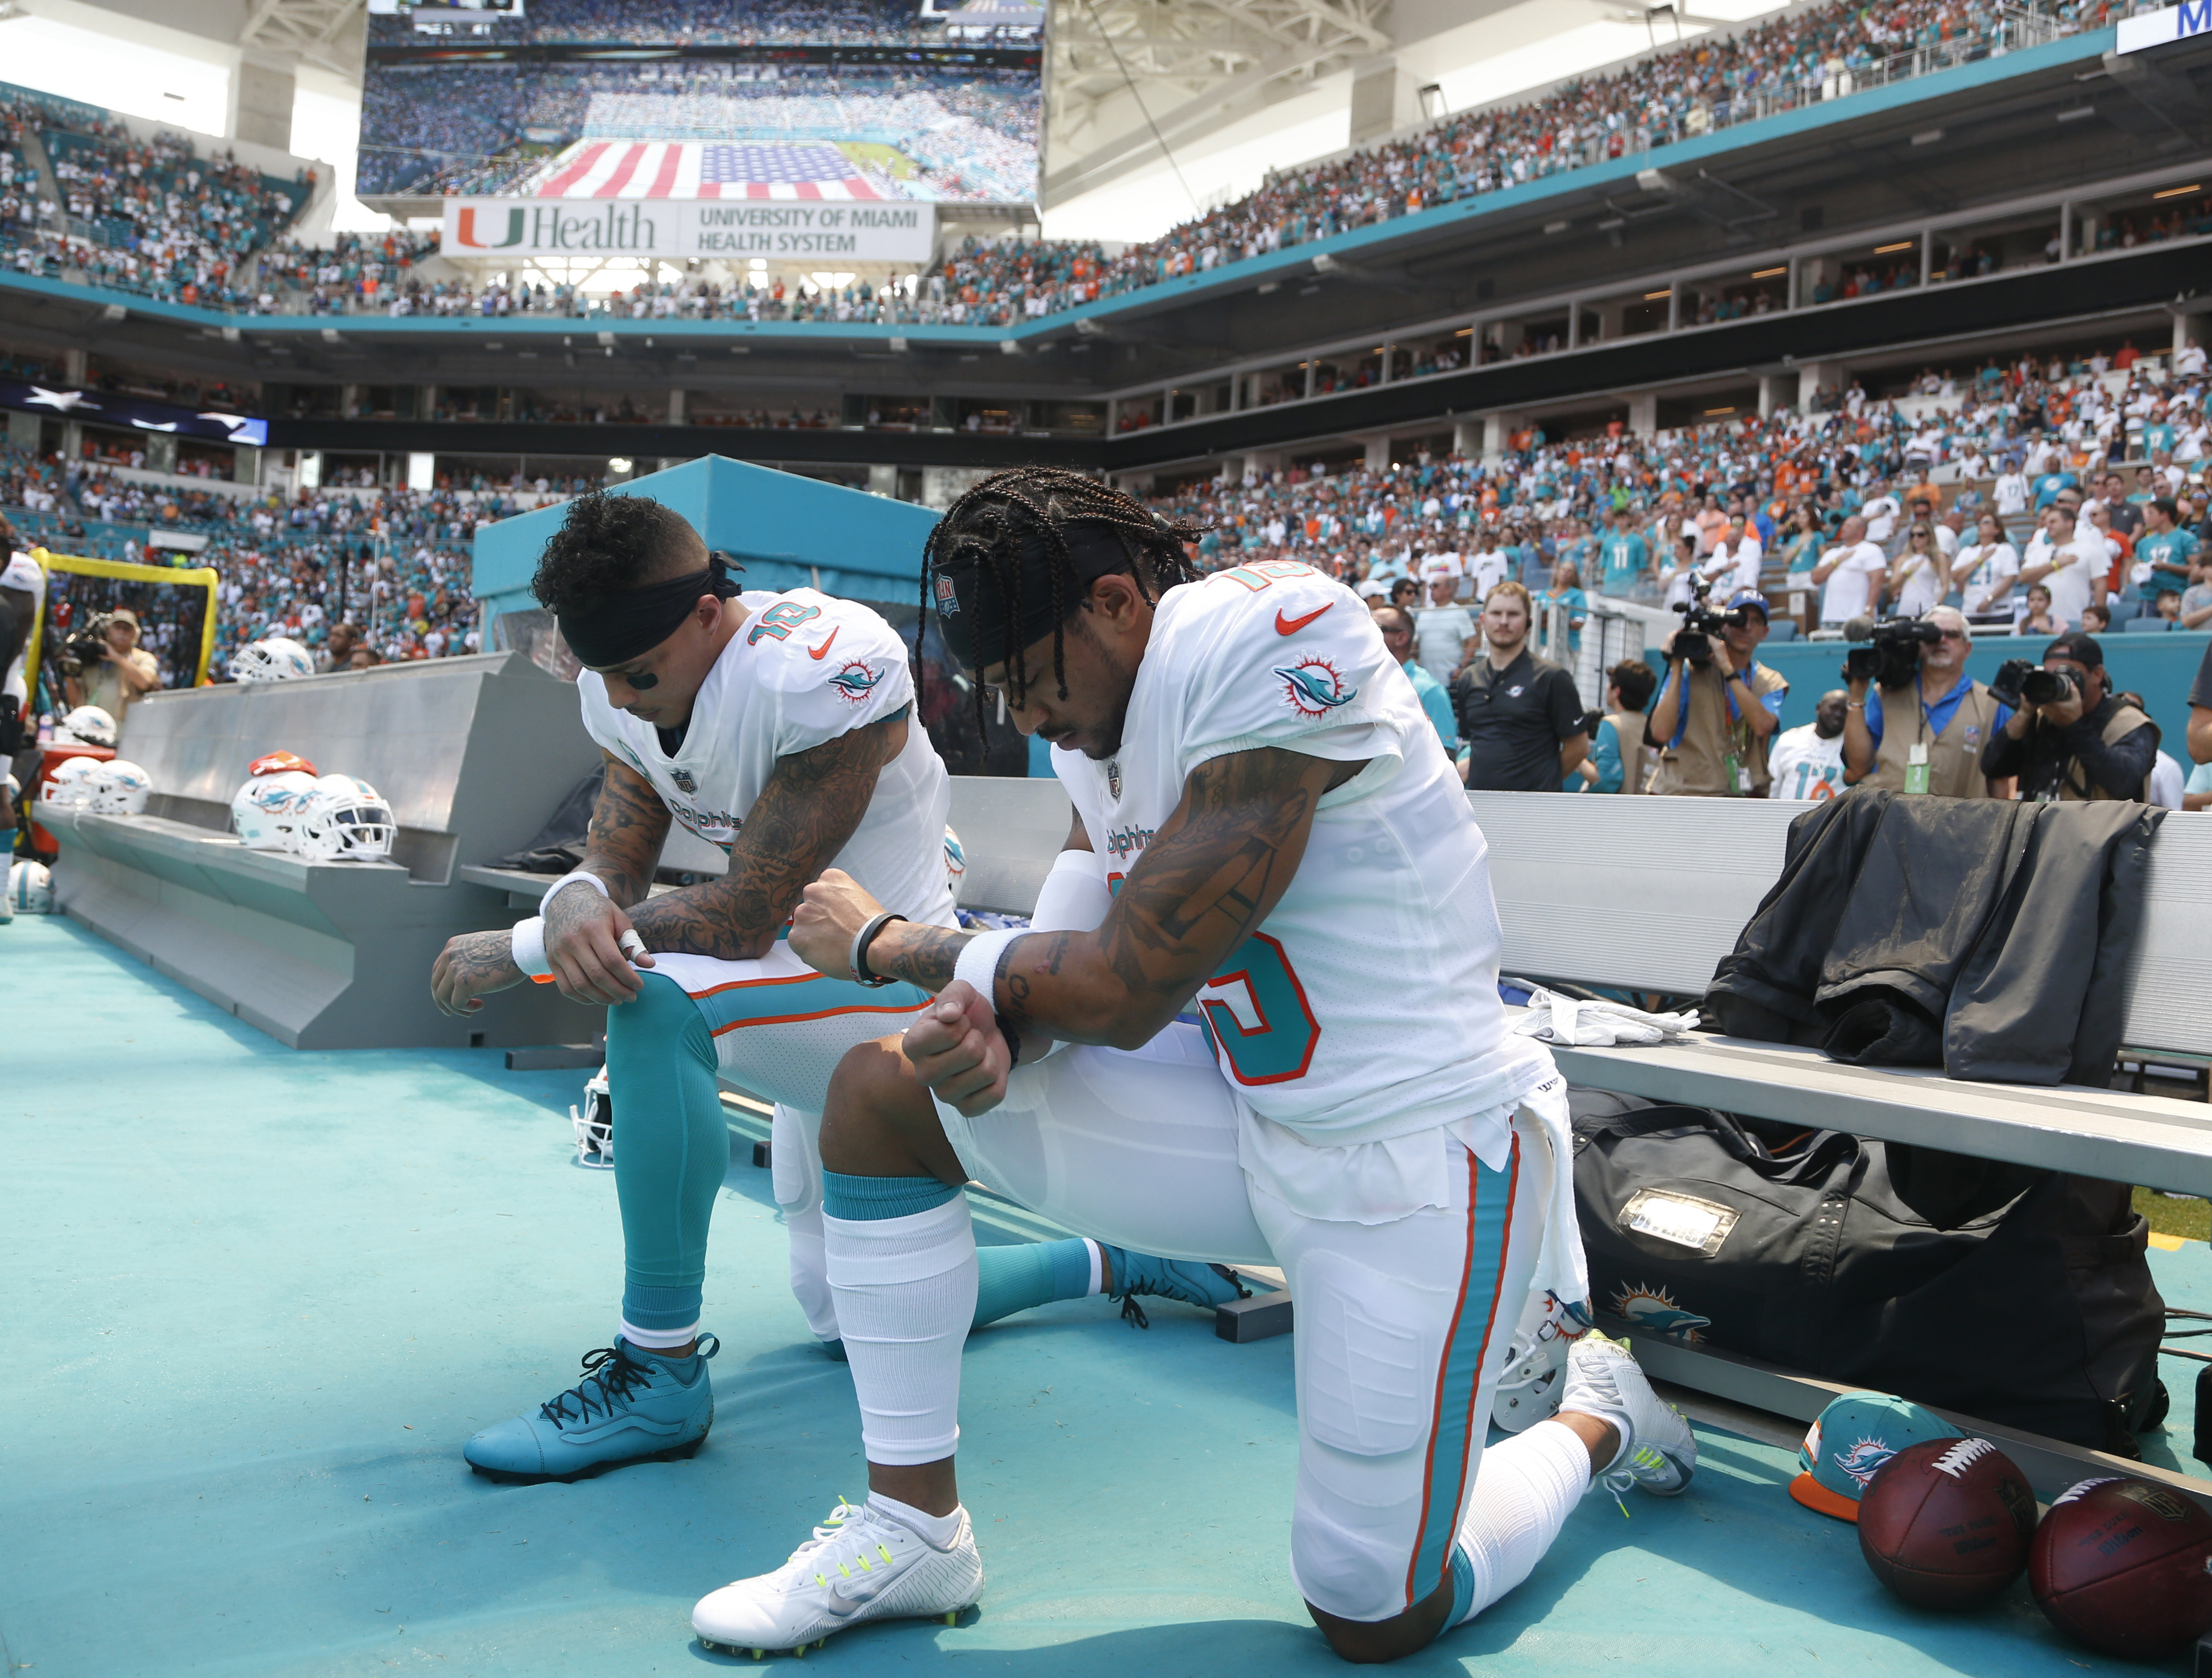 Only a handful take action during anthem on NFL's 1st Sunday